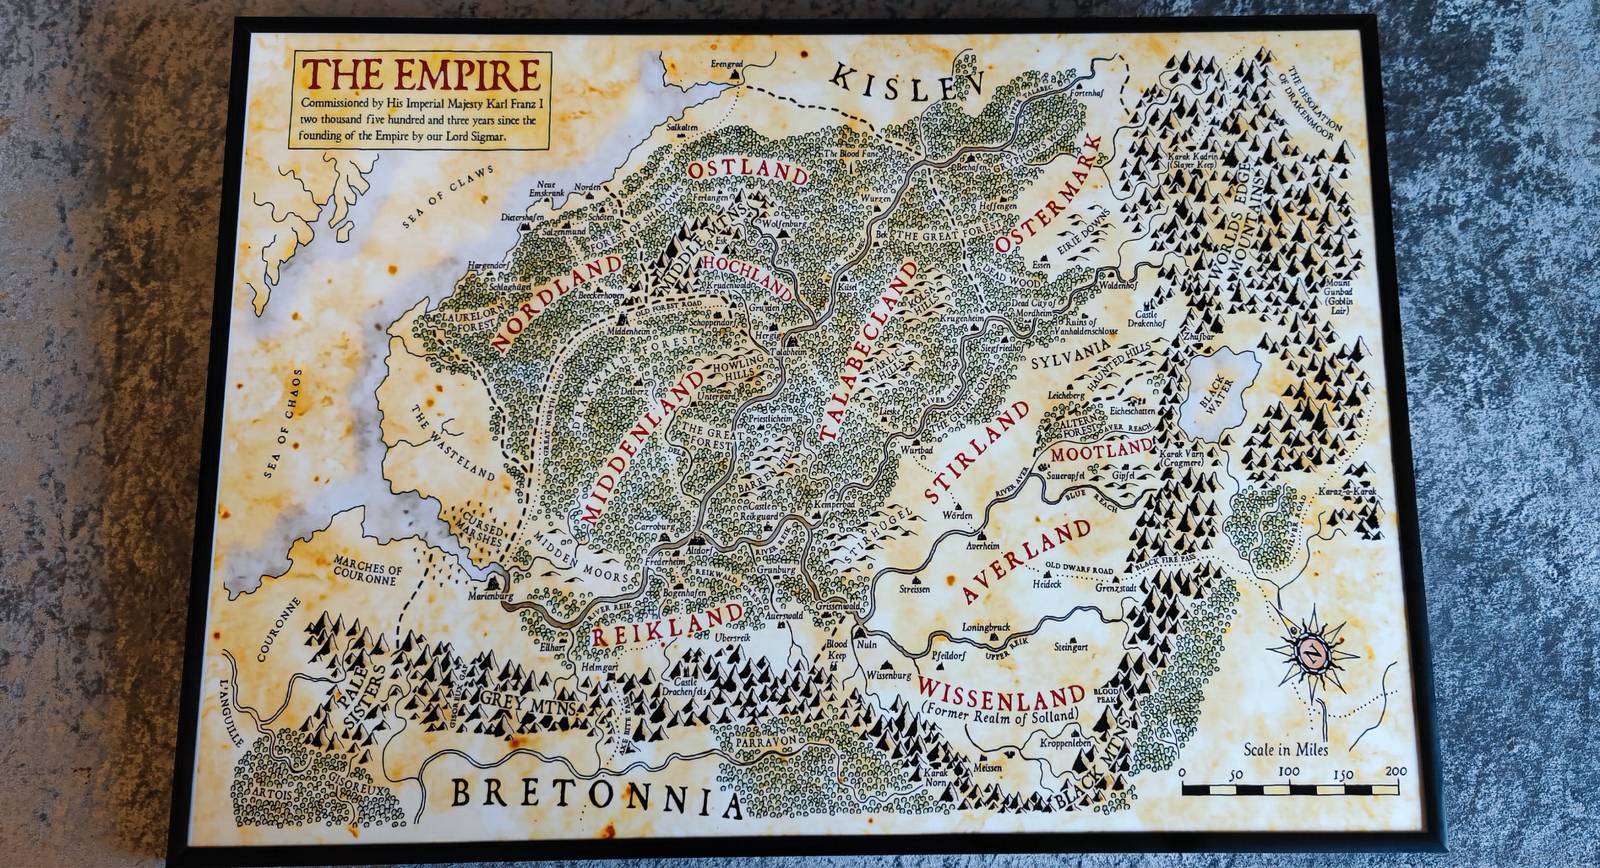 Primary image for High quality map of the Empire from the Total War: Warhammer series